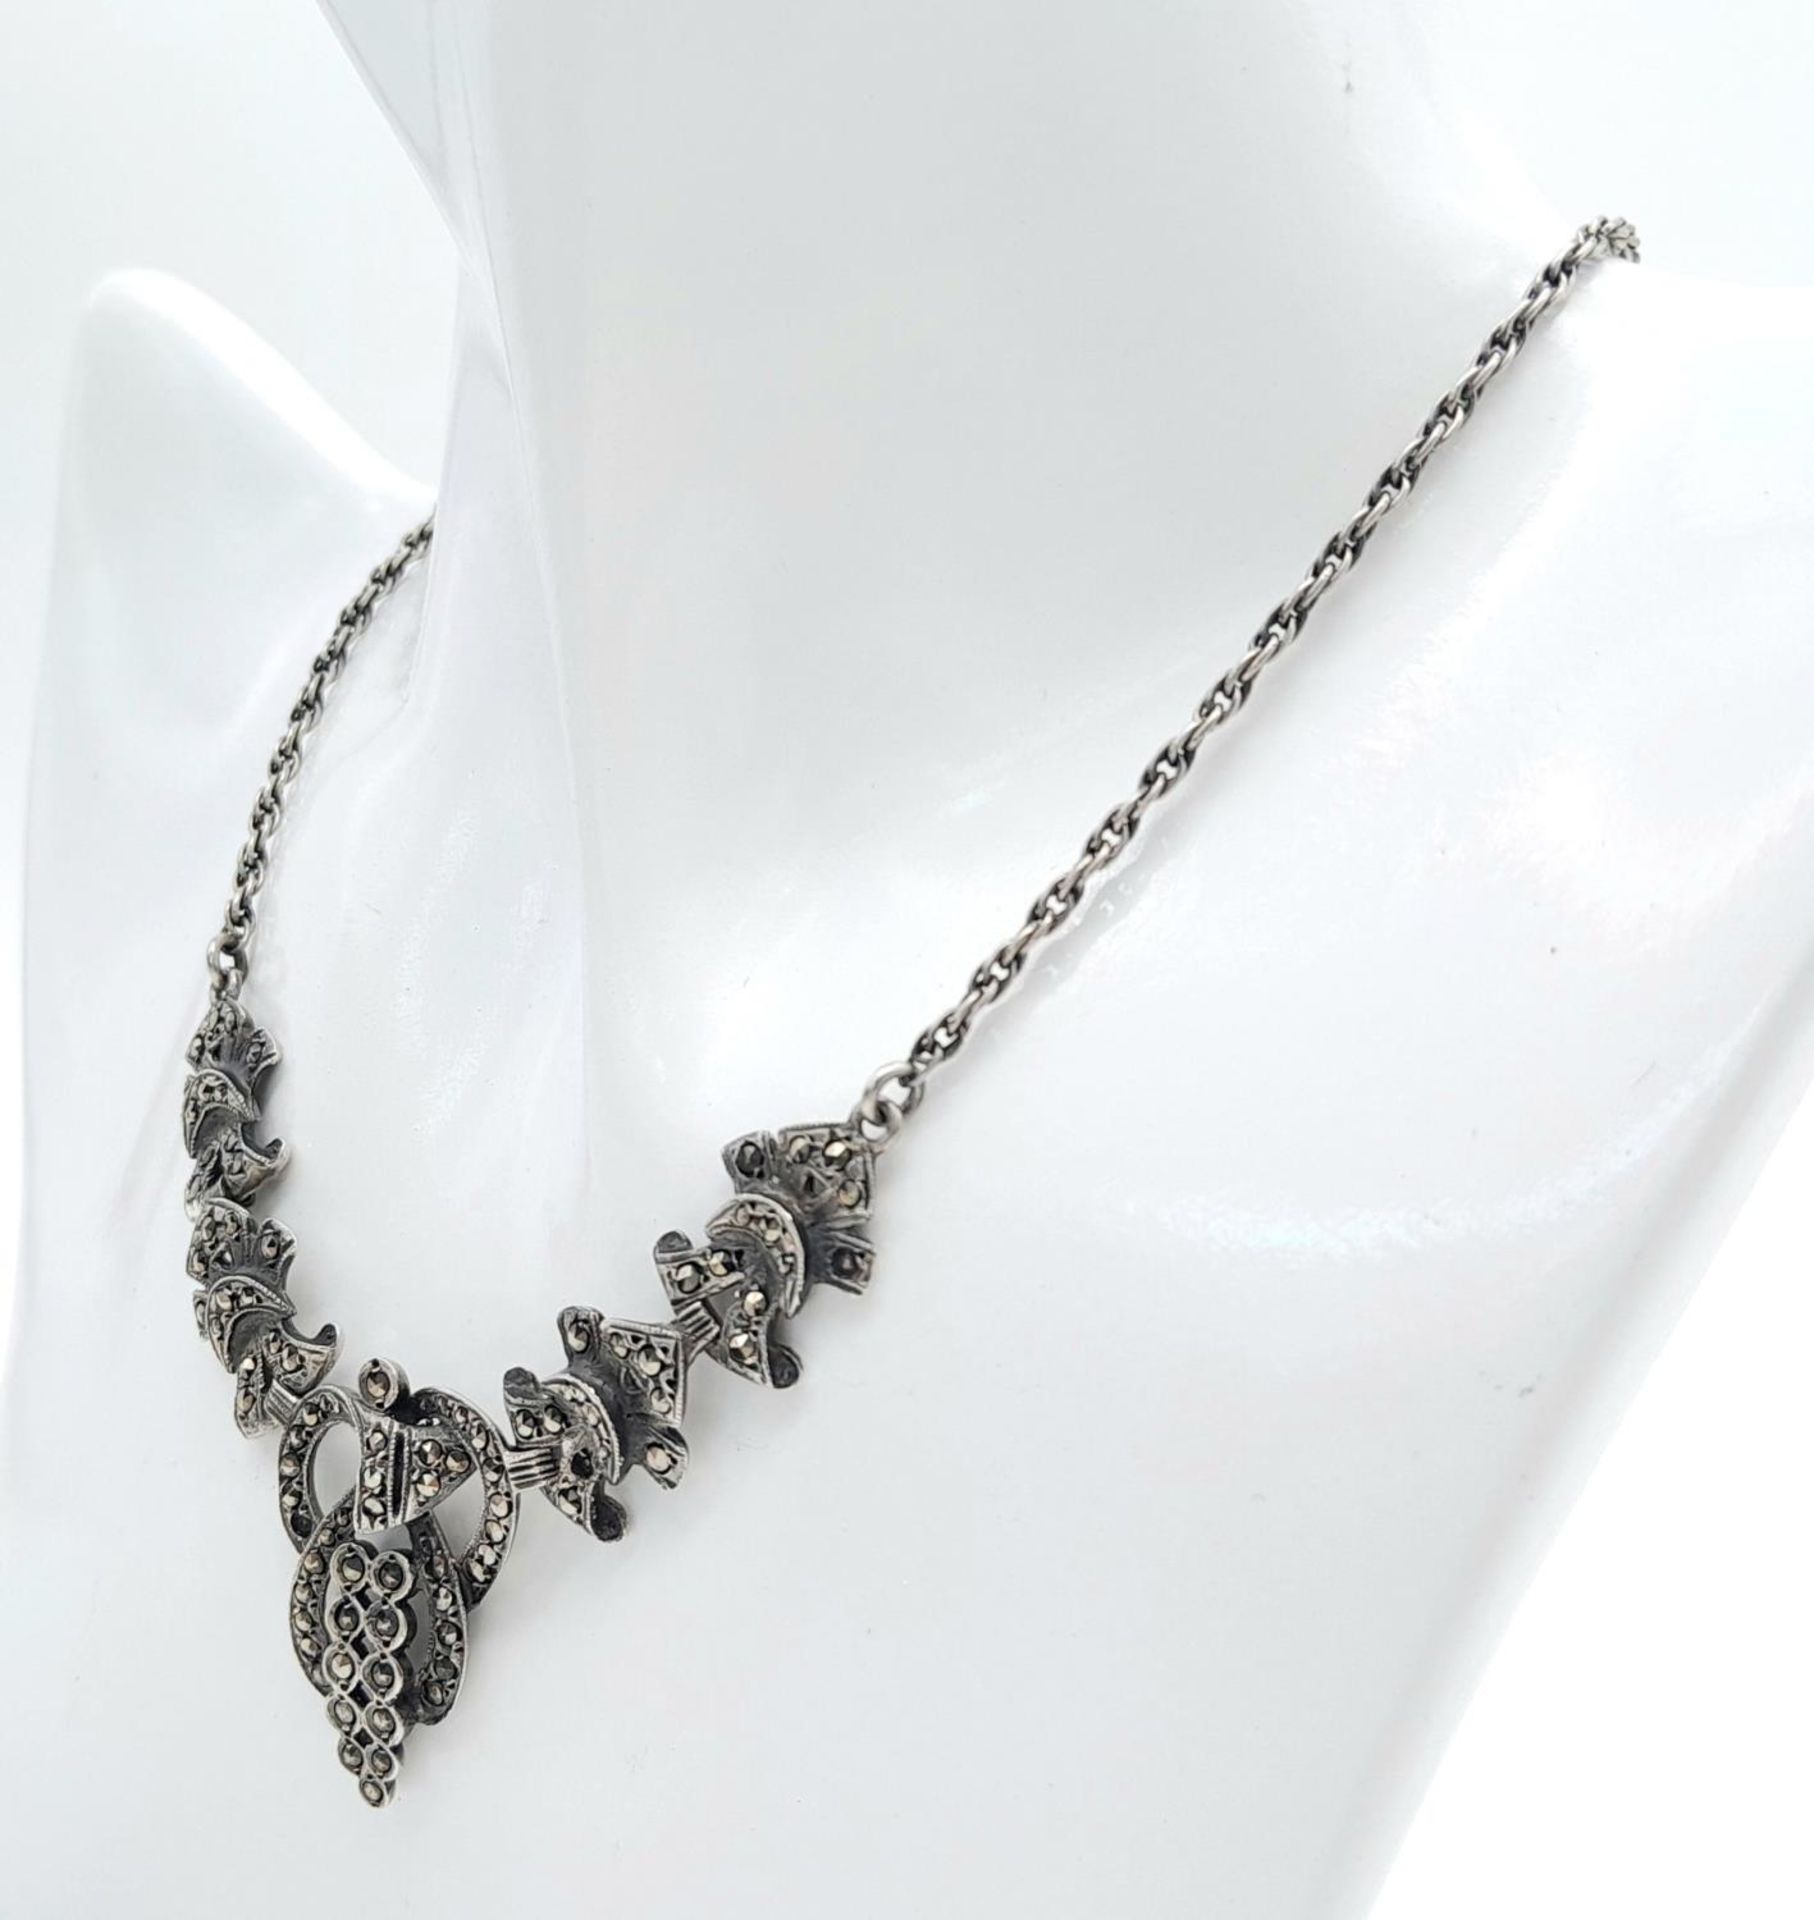 A Vintage Silver Marcasite Necklace. 43cm length, 18.92g total weight. - Image 3 of 5